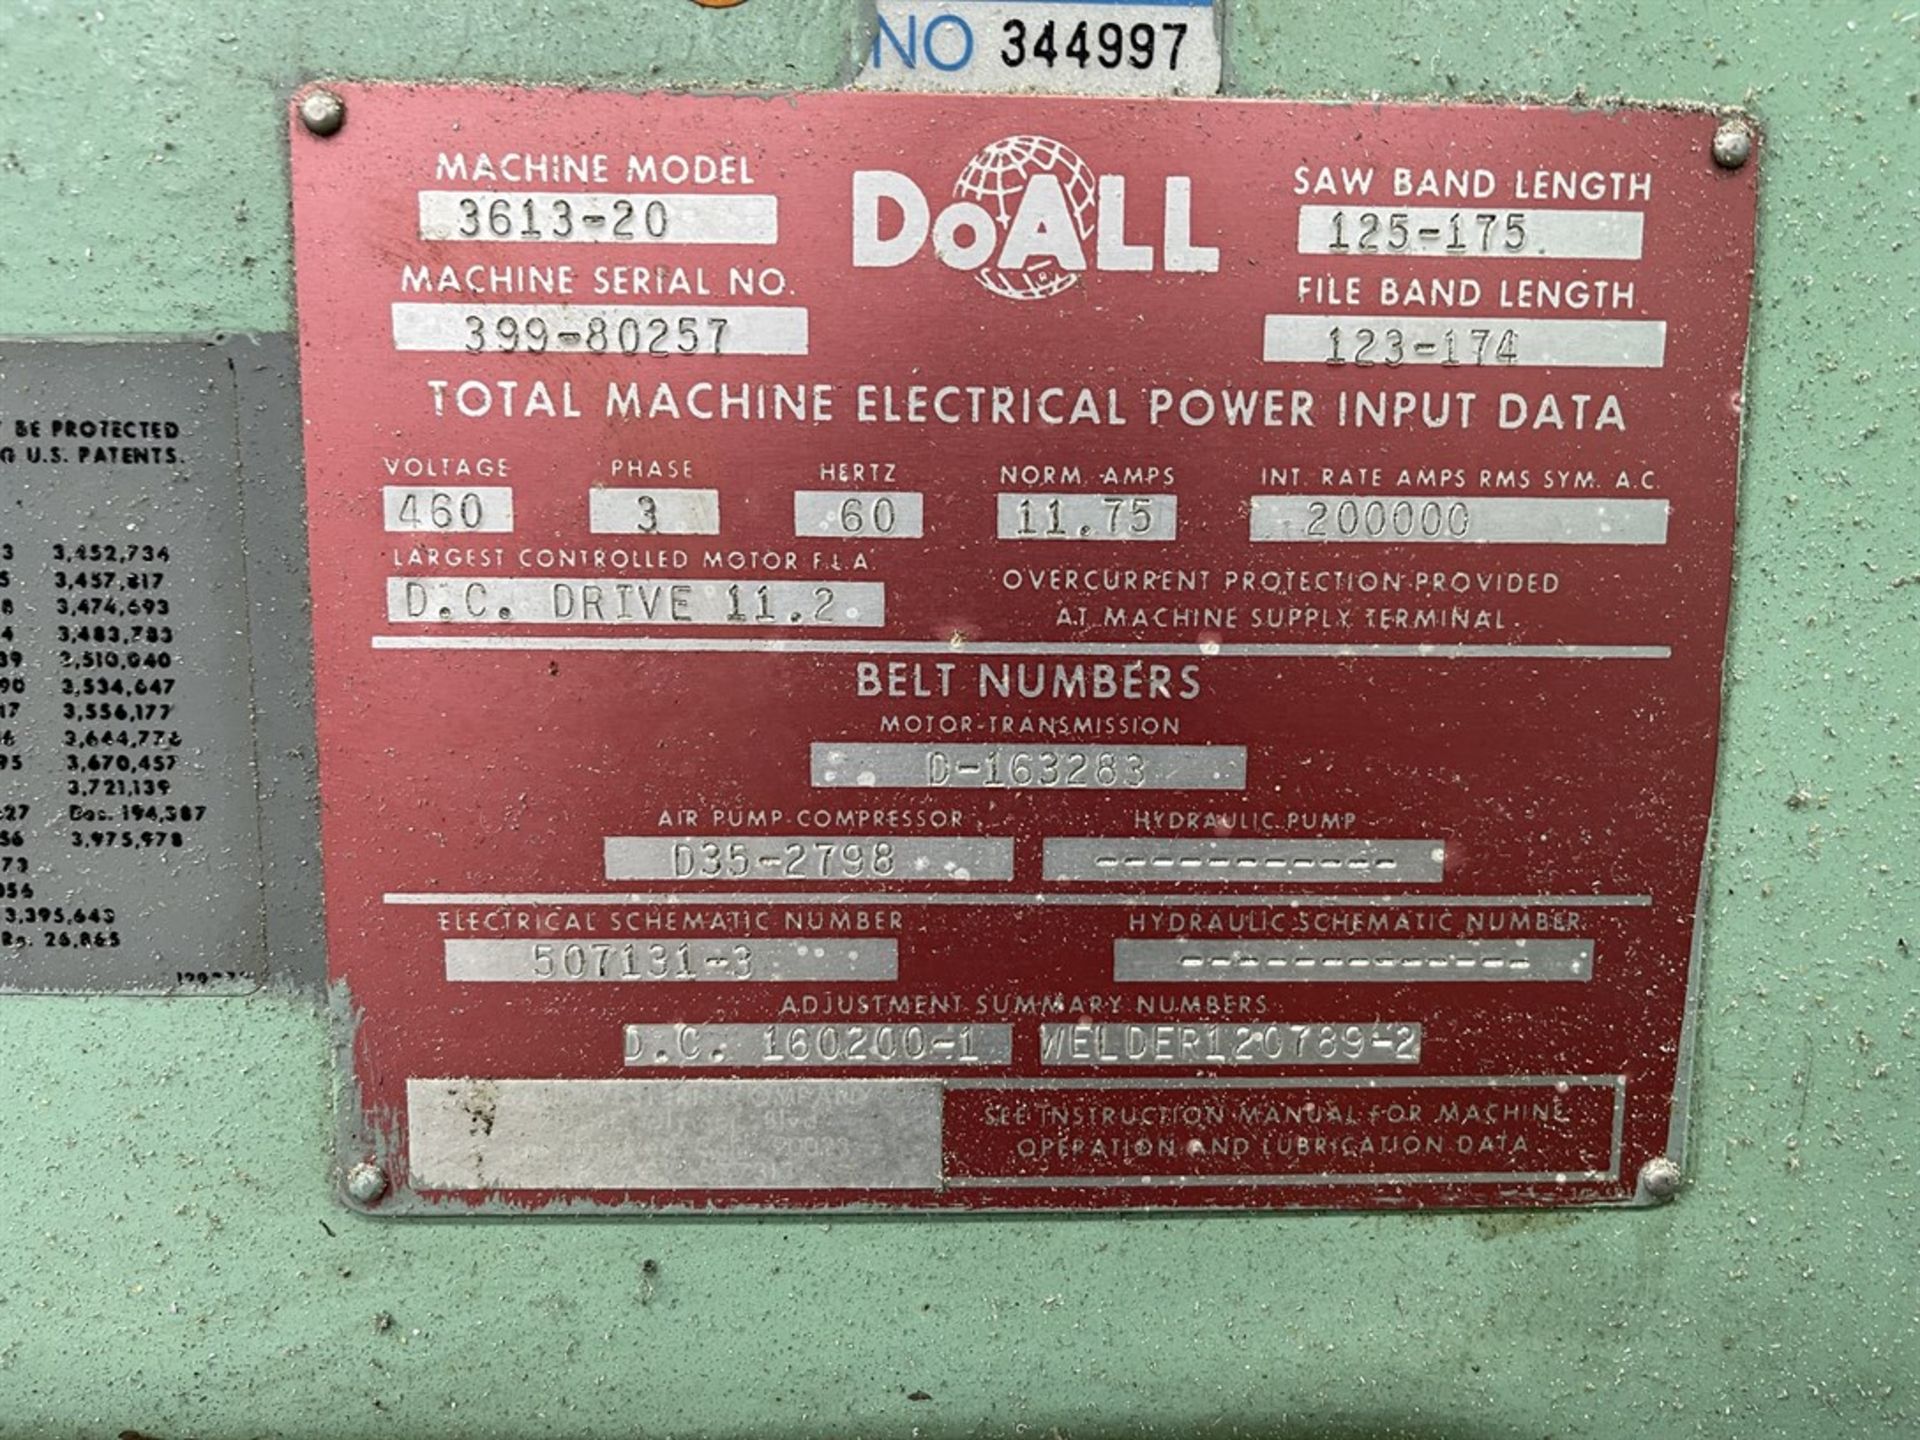 DOALL 3613-20 Vertical Bandsaw, s/n 399-80257 - Image 6 of 6